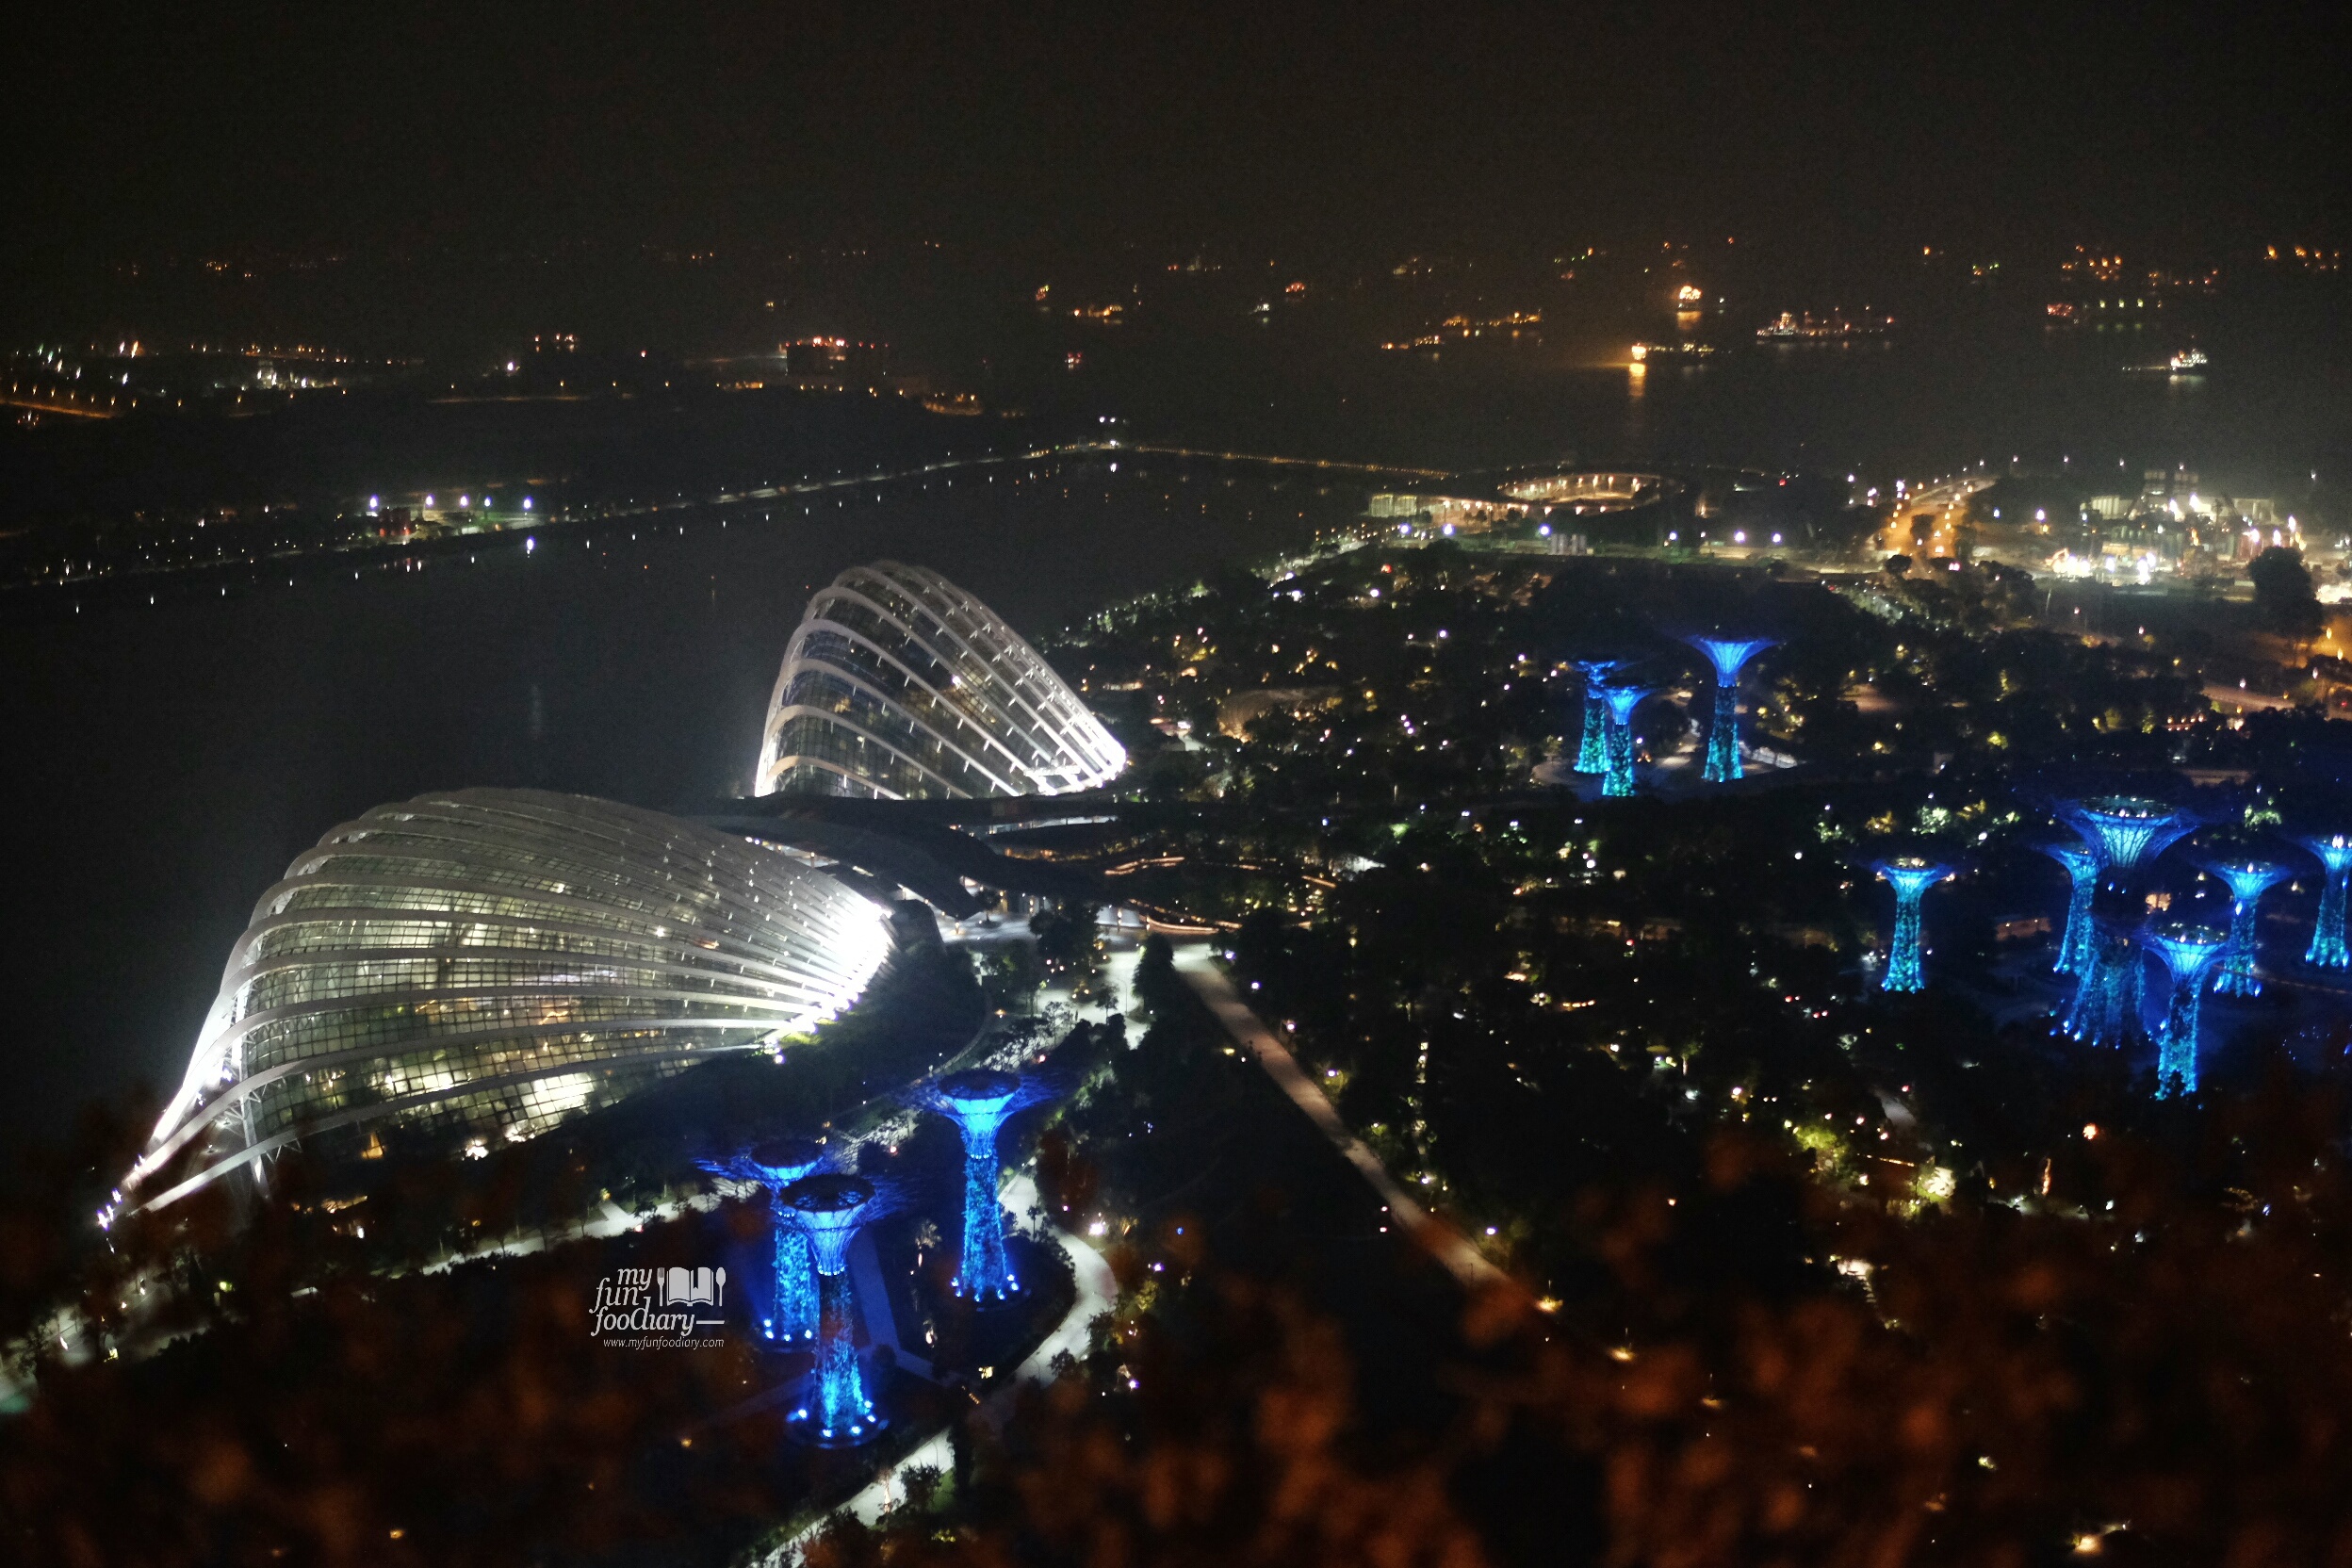 Night View from my room 4318 Deluxe Room Tower 3 Marina Bay Sands to Esplanade and Garden by The Bay by Myfunfoodiary